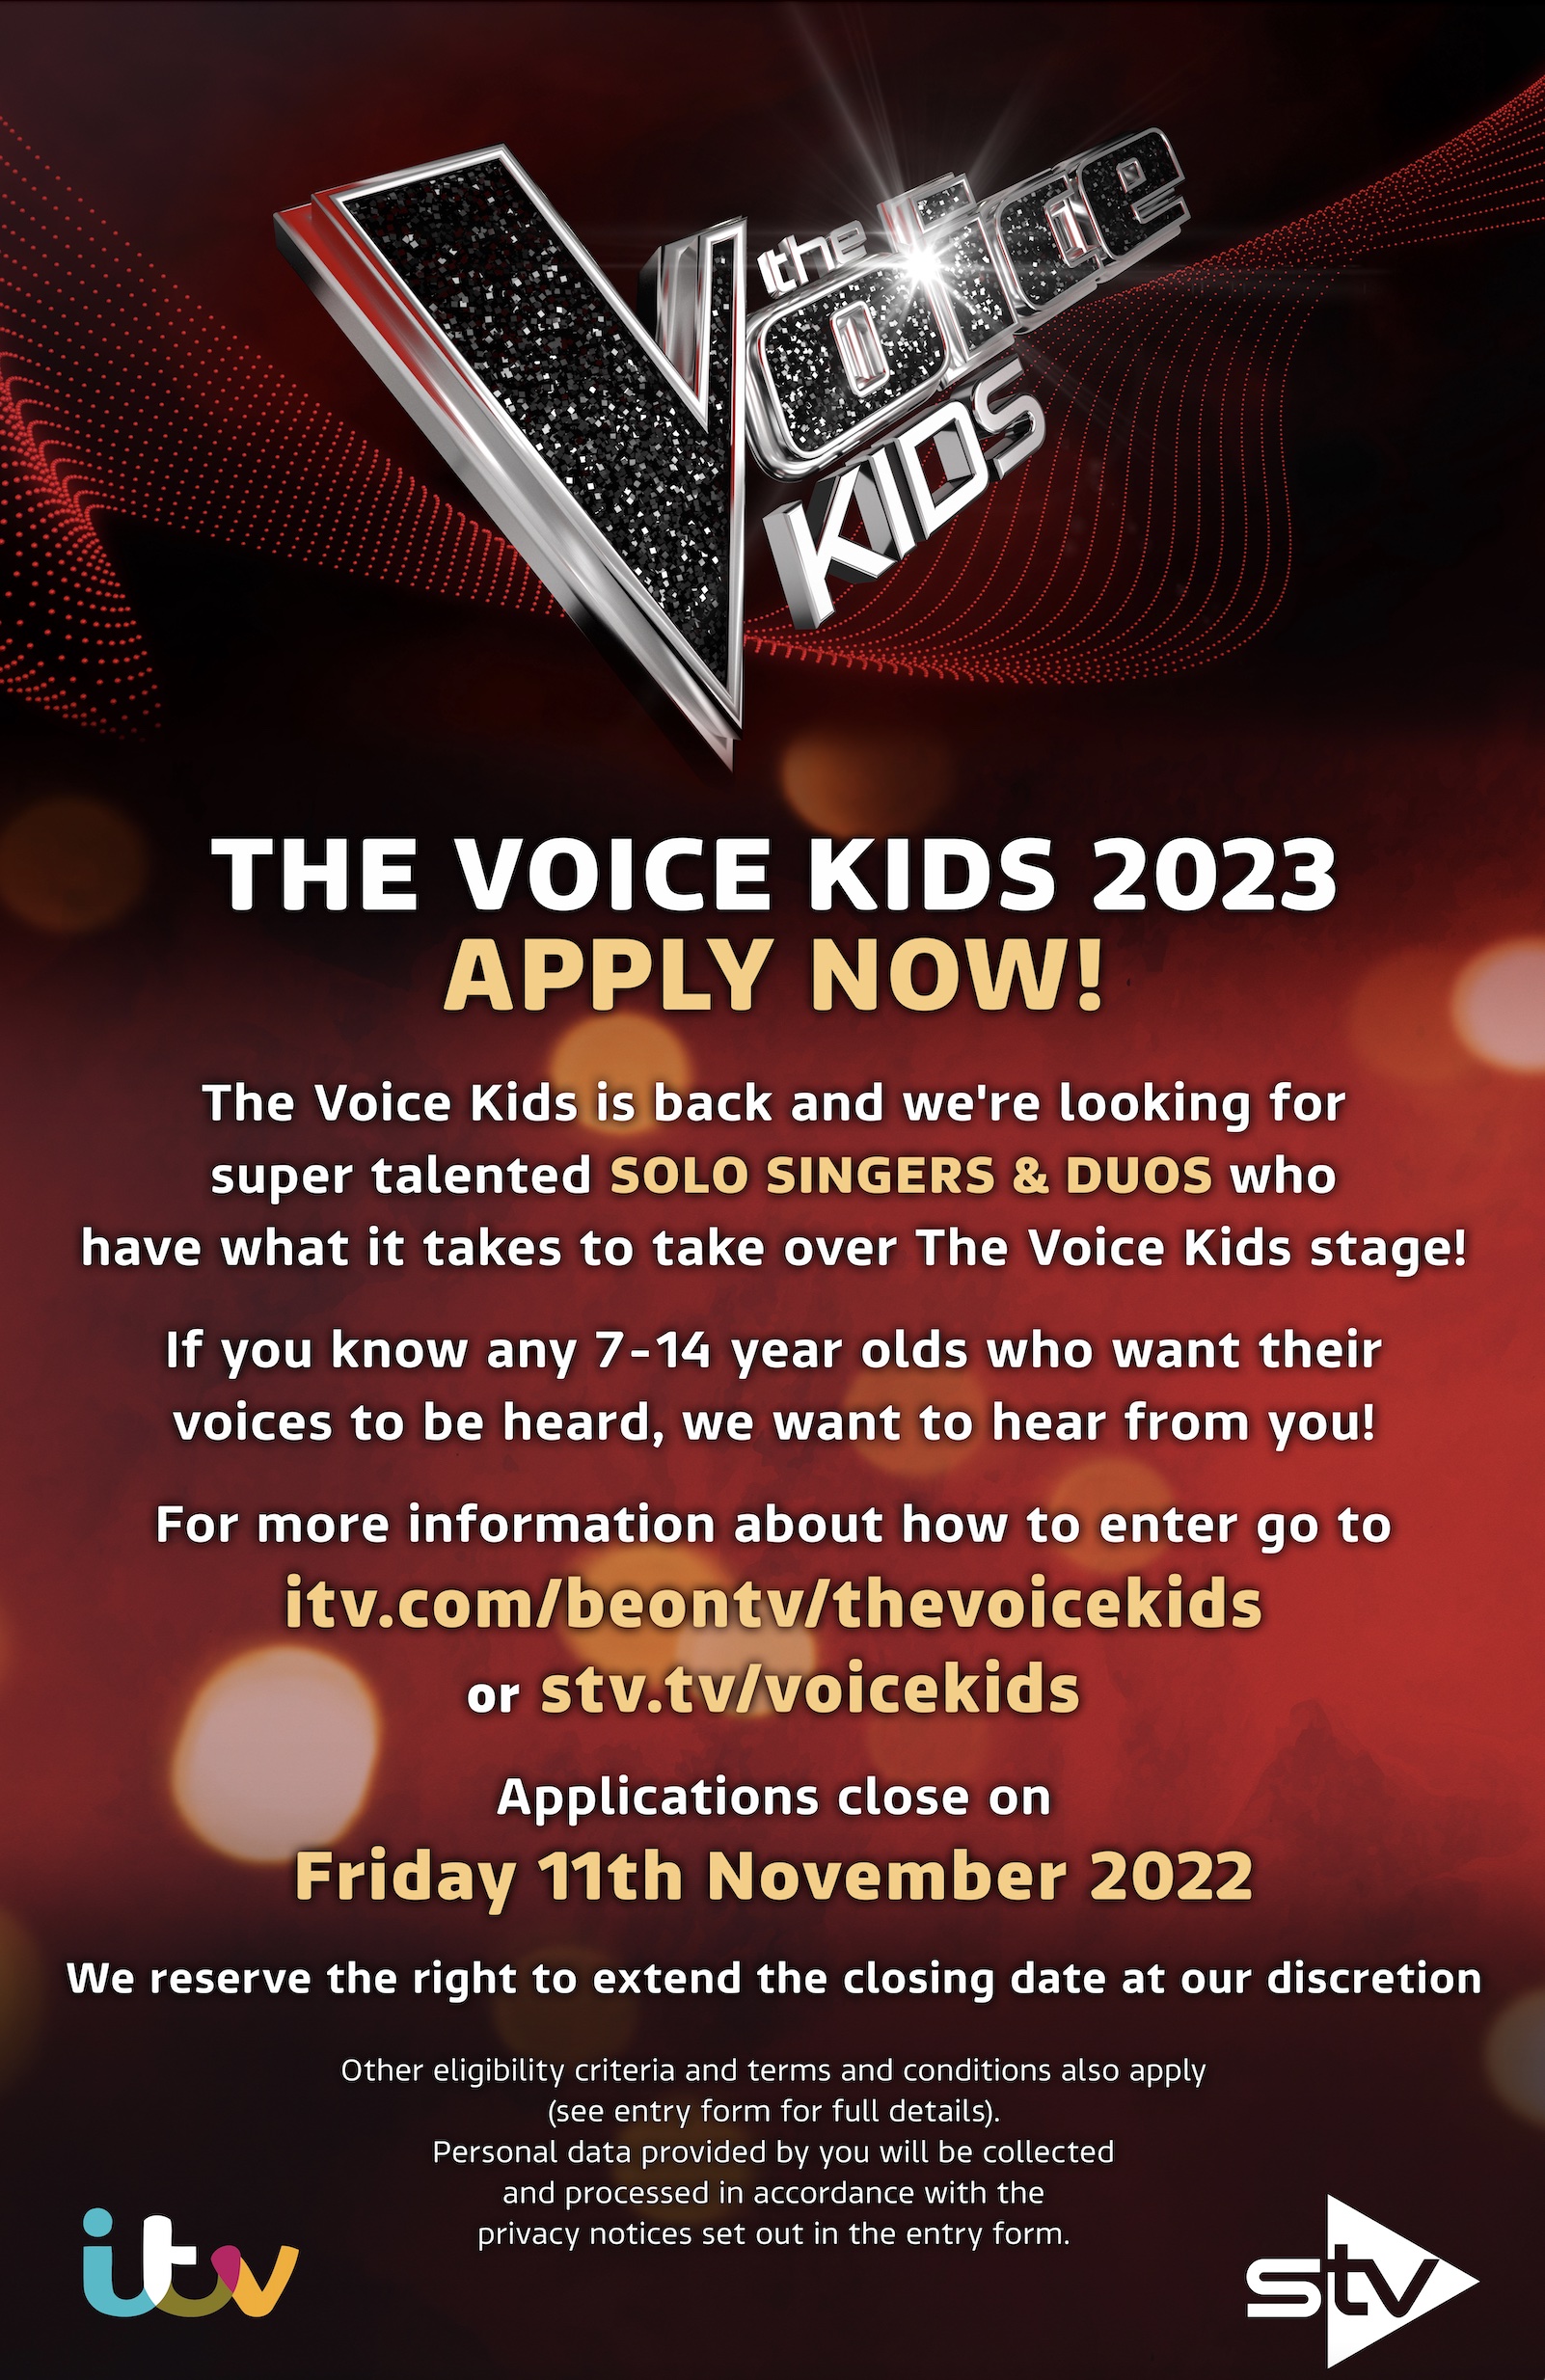 The Voice Kids 2023 The Voice Kids is back in 2023! - The Midi Music Company